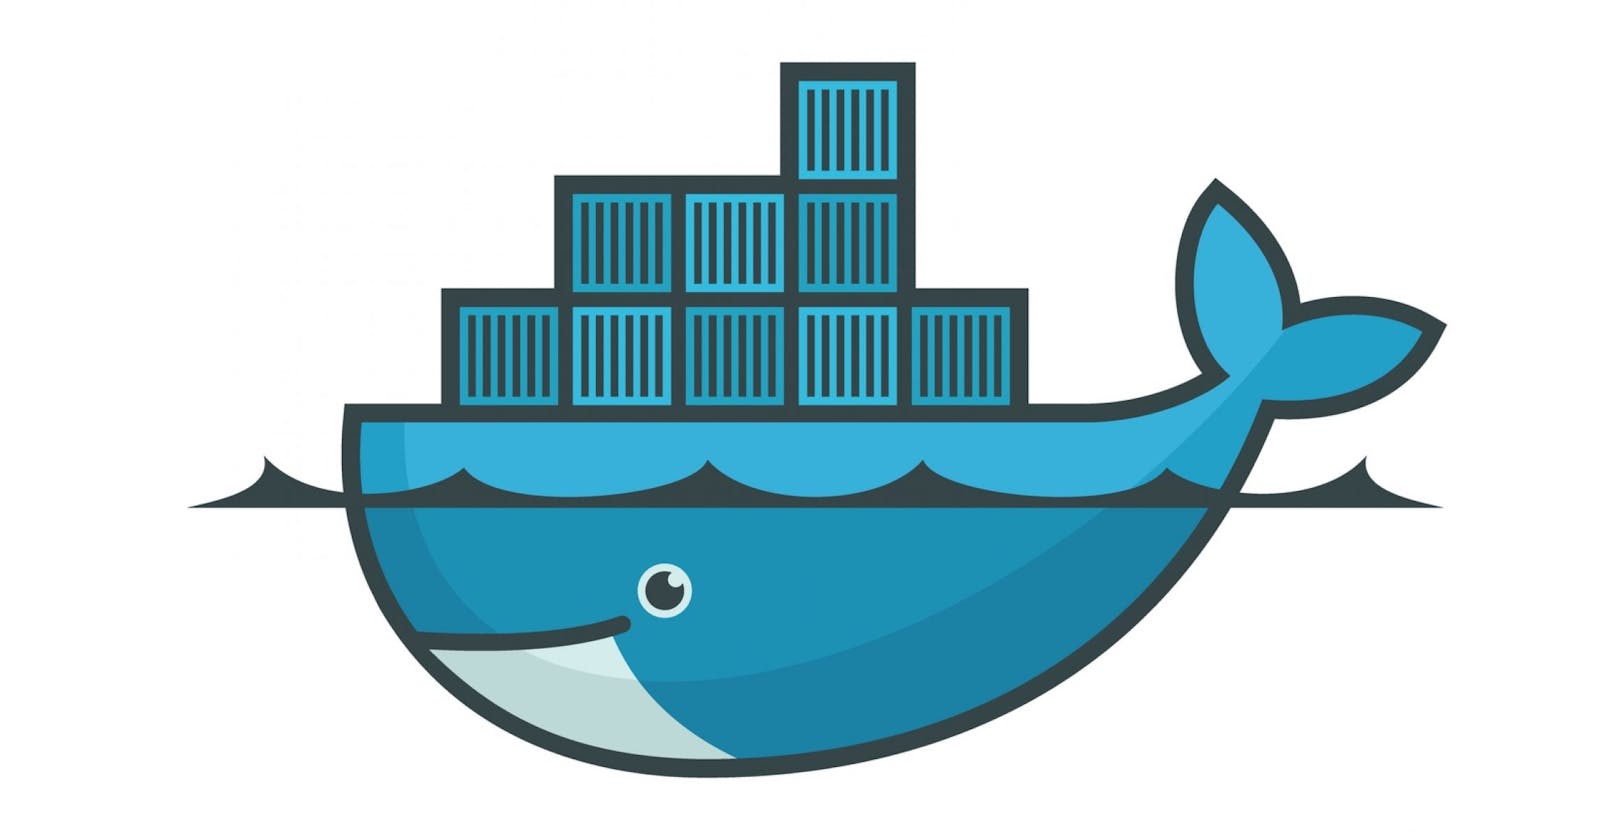 What is docker and why everyone is using it?